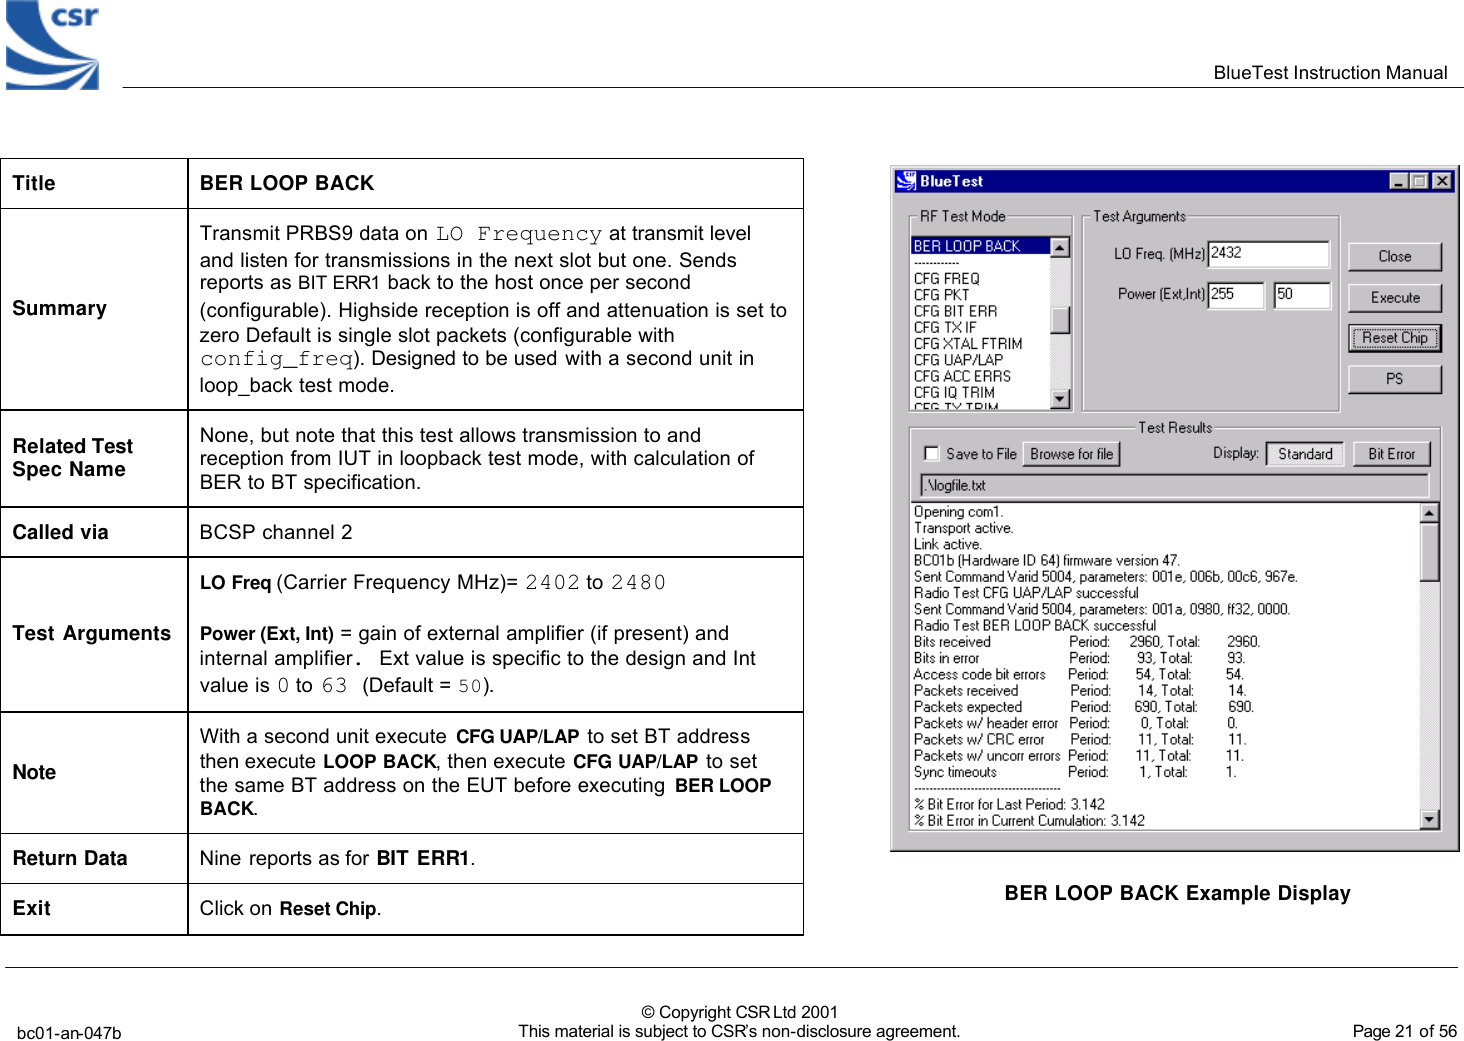      BlueTest Instruction Manual   bc01-an-047b   © Copyright CSR Ltd 2001 This material is subject to CSR’s non-disclosure agreement.    Page 21 of 56  BlueCoreTM01   Title  BER LOOP BACK Summary Transmit PRBS9 data on LO Frequency at transmit level and listen for transmissions in the next slot but one. Sends reports as BIT ERR1 back to the host once per second (configurable). Highside reception is off and attenuation is set to zero Default is single slot packets (configurable with config_freq). Designed to be used with a second unit in loop_back test mode. Related Test Spec Name None, but note that this test allows transmission to and reception from IUT in loopback test mode, with calculation of BER to BT specification. Called via BCSP channel 2 Test Arguments LO Freq (Carrier Frequency MHz)= 2402 to 2480 Power (Ext, Int) = gain of external amplifier (if present) and internal amplifier. Ext value is specific to the design and Int value is 0 to 63 (Default = 50). Note With a second unit execute CFG UAP/LAP to set BT address then execute LOOP BACK, then execute CFG UAP/LAP to set the same BT address on the EUT before executing BER LOOP BACK. Return Data Nine reports as for BIT ERR1. Exit Click on Reset Chip.  BER LOOP BACK Example Display  